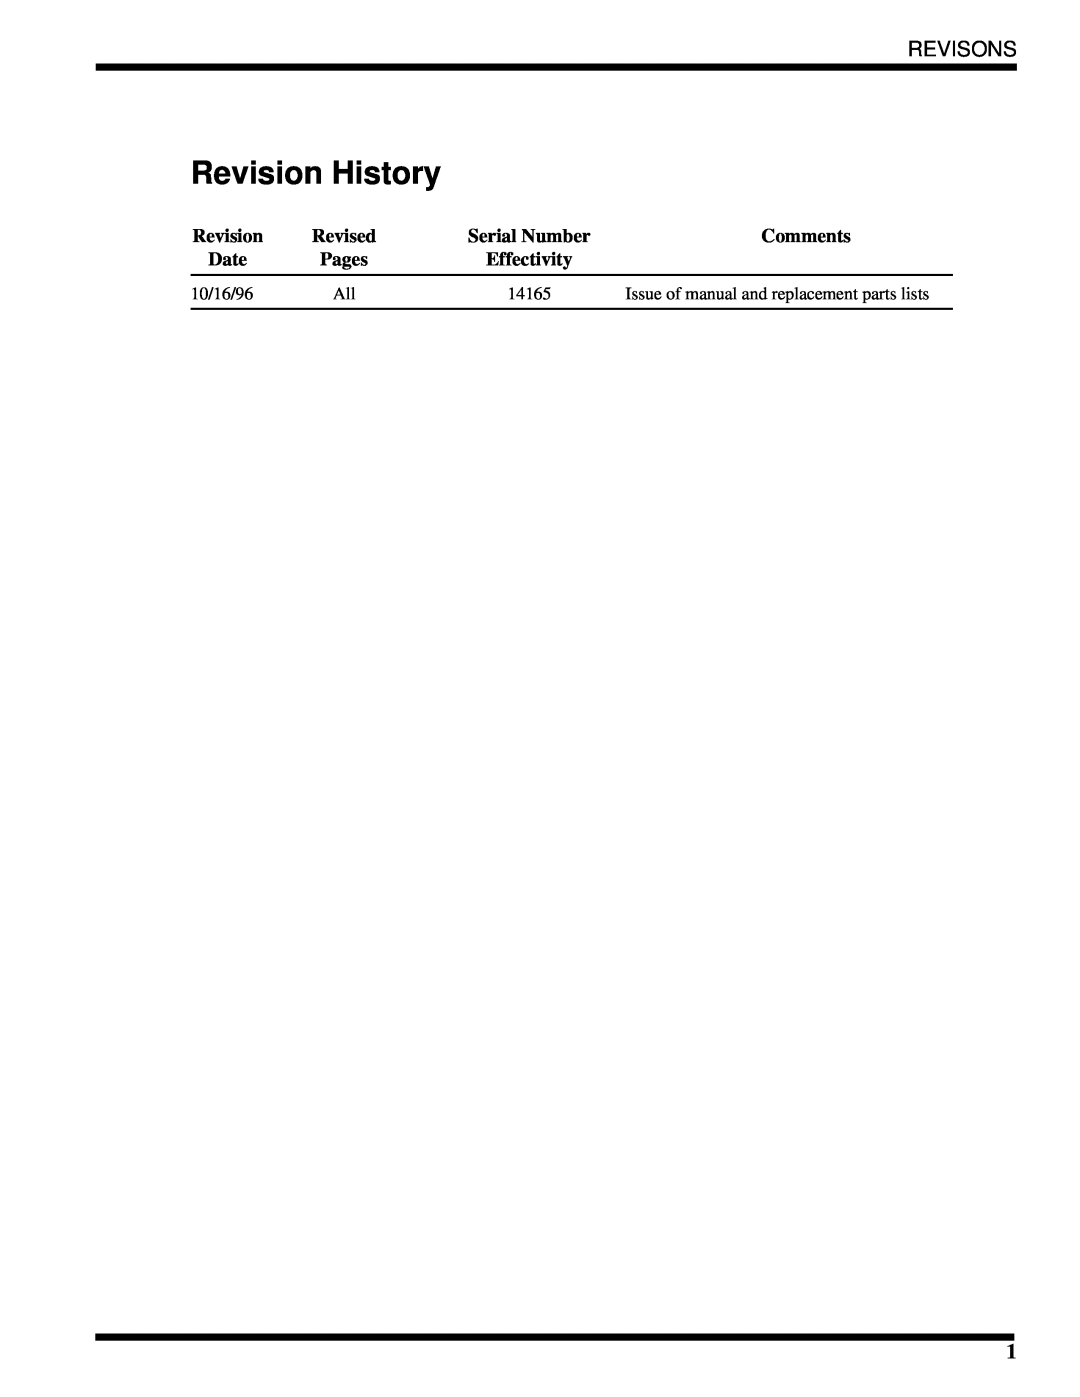 Moyer Diebel MH-6NM2, MH-60M2, MH-6LM2 technical manual Revision History, Revisons, Comments, Date, Effectivity 